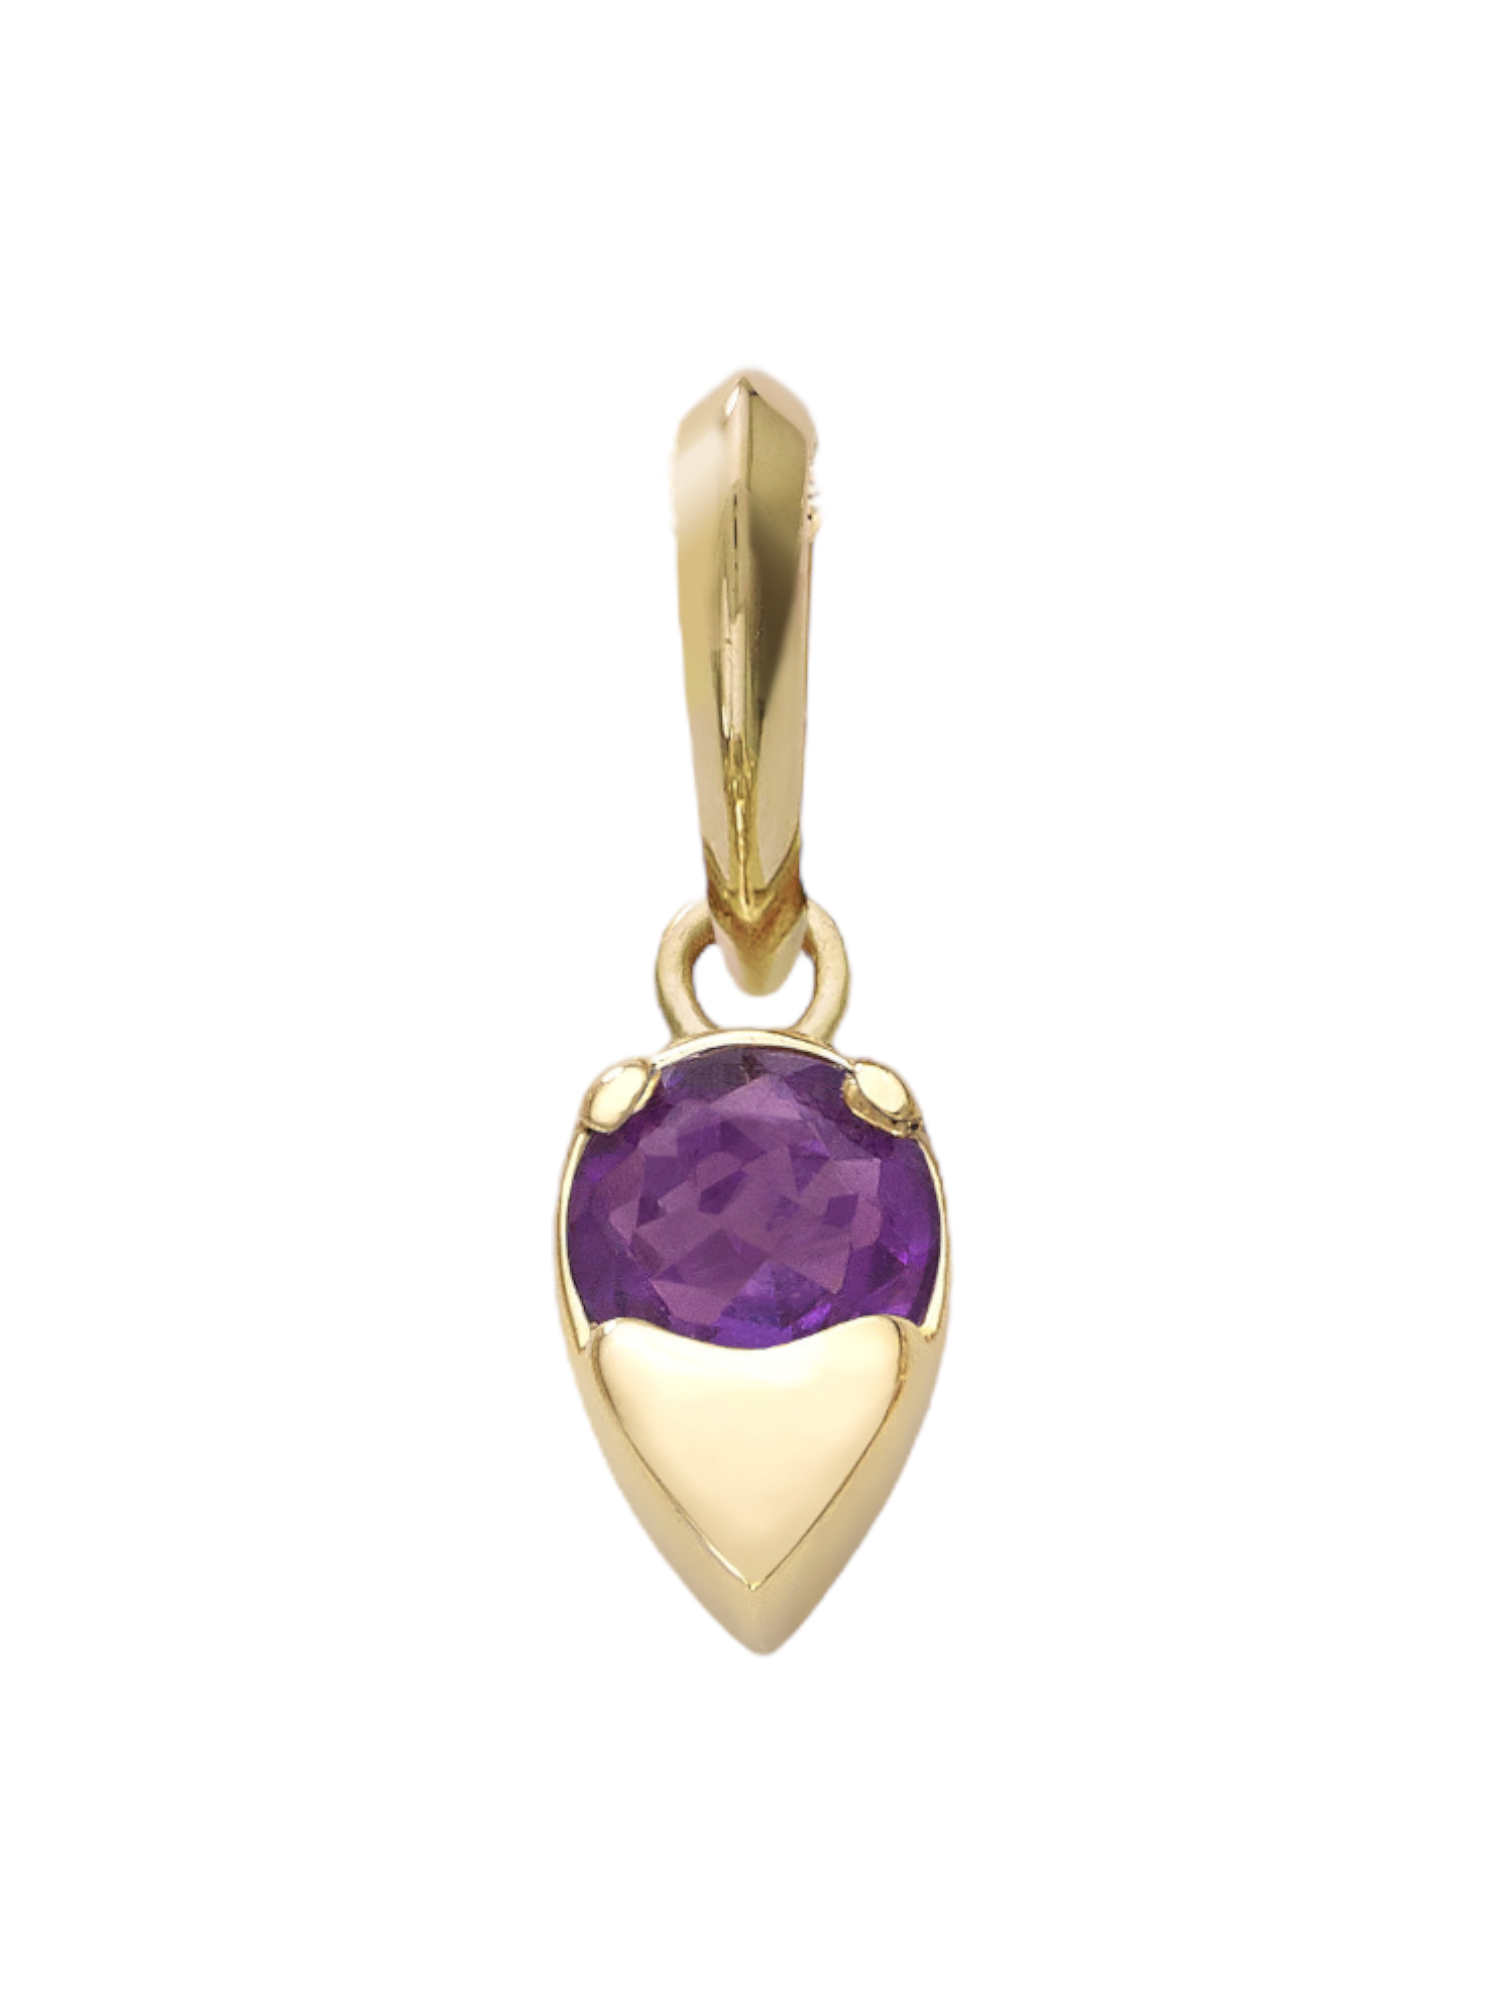 The Birthstone Pendant (Collection) House of Devam